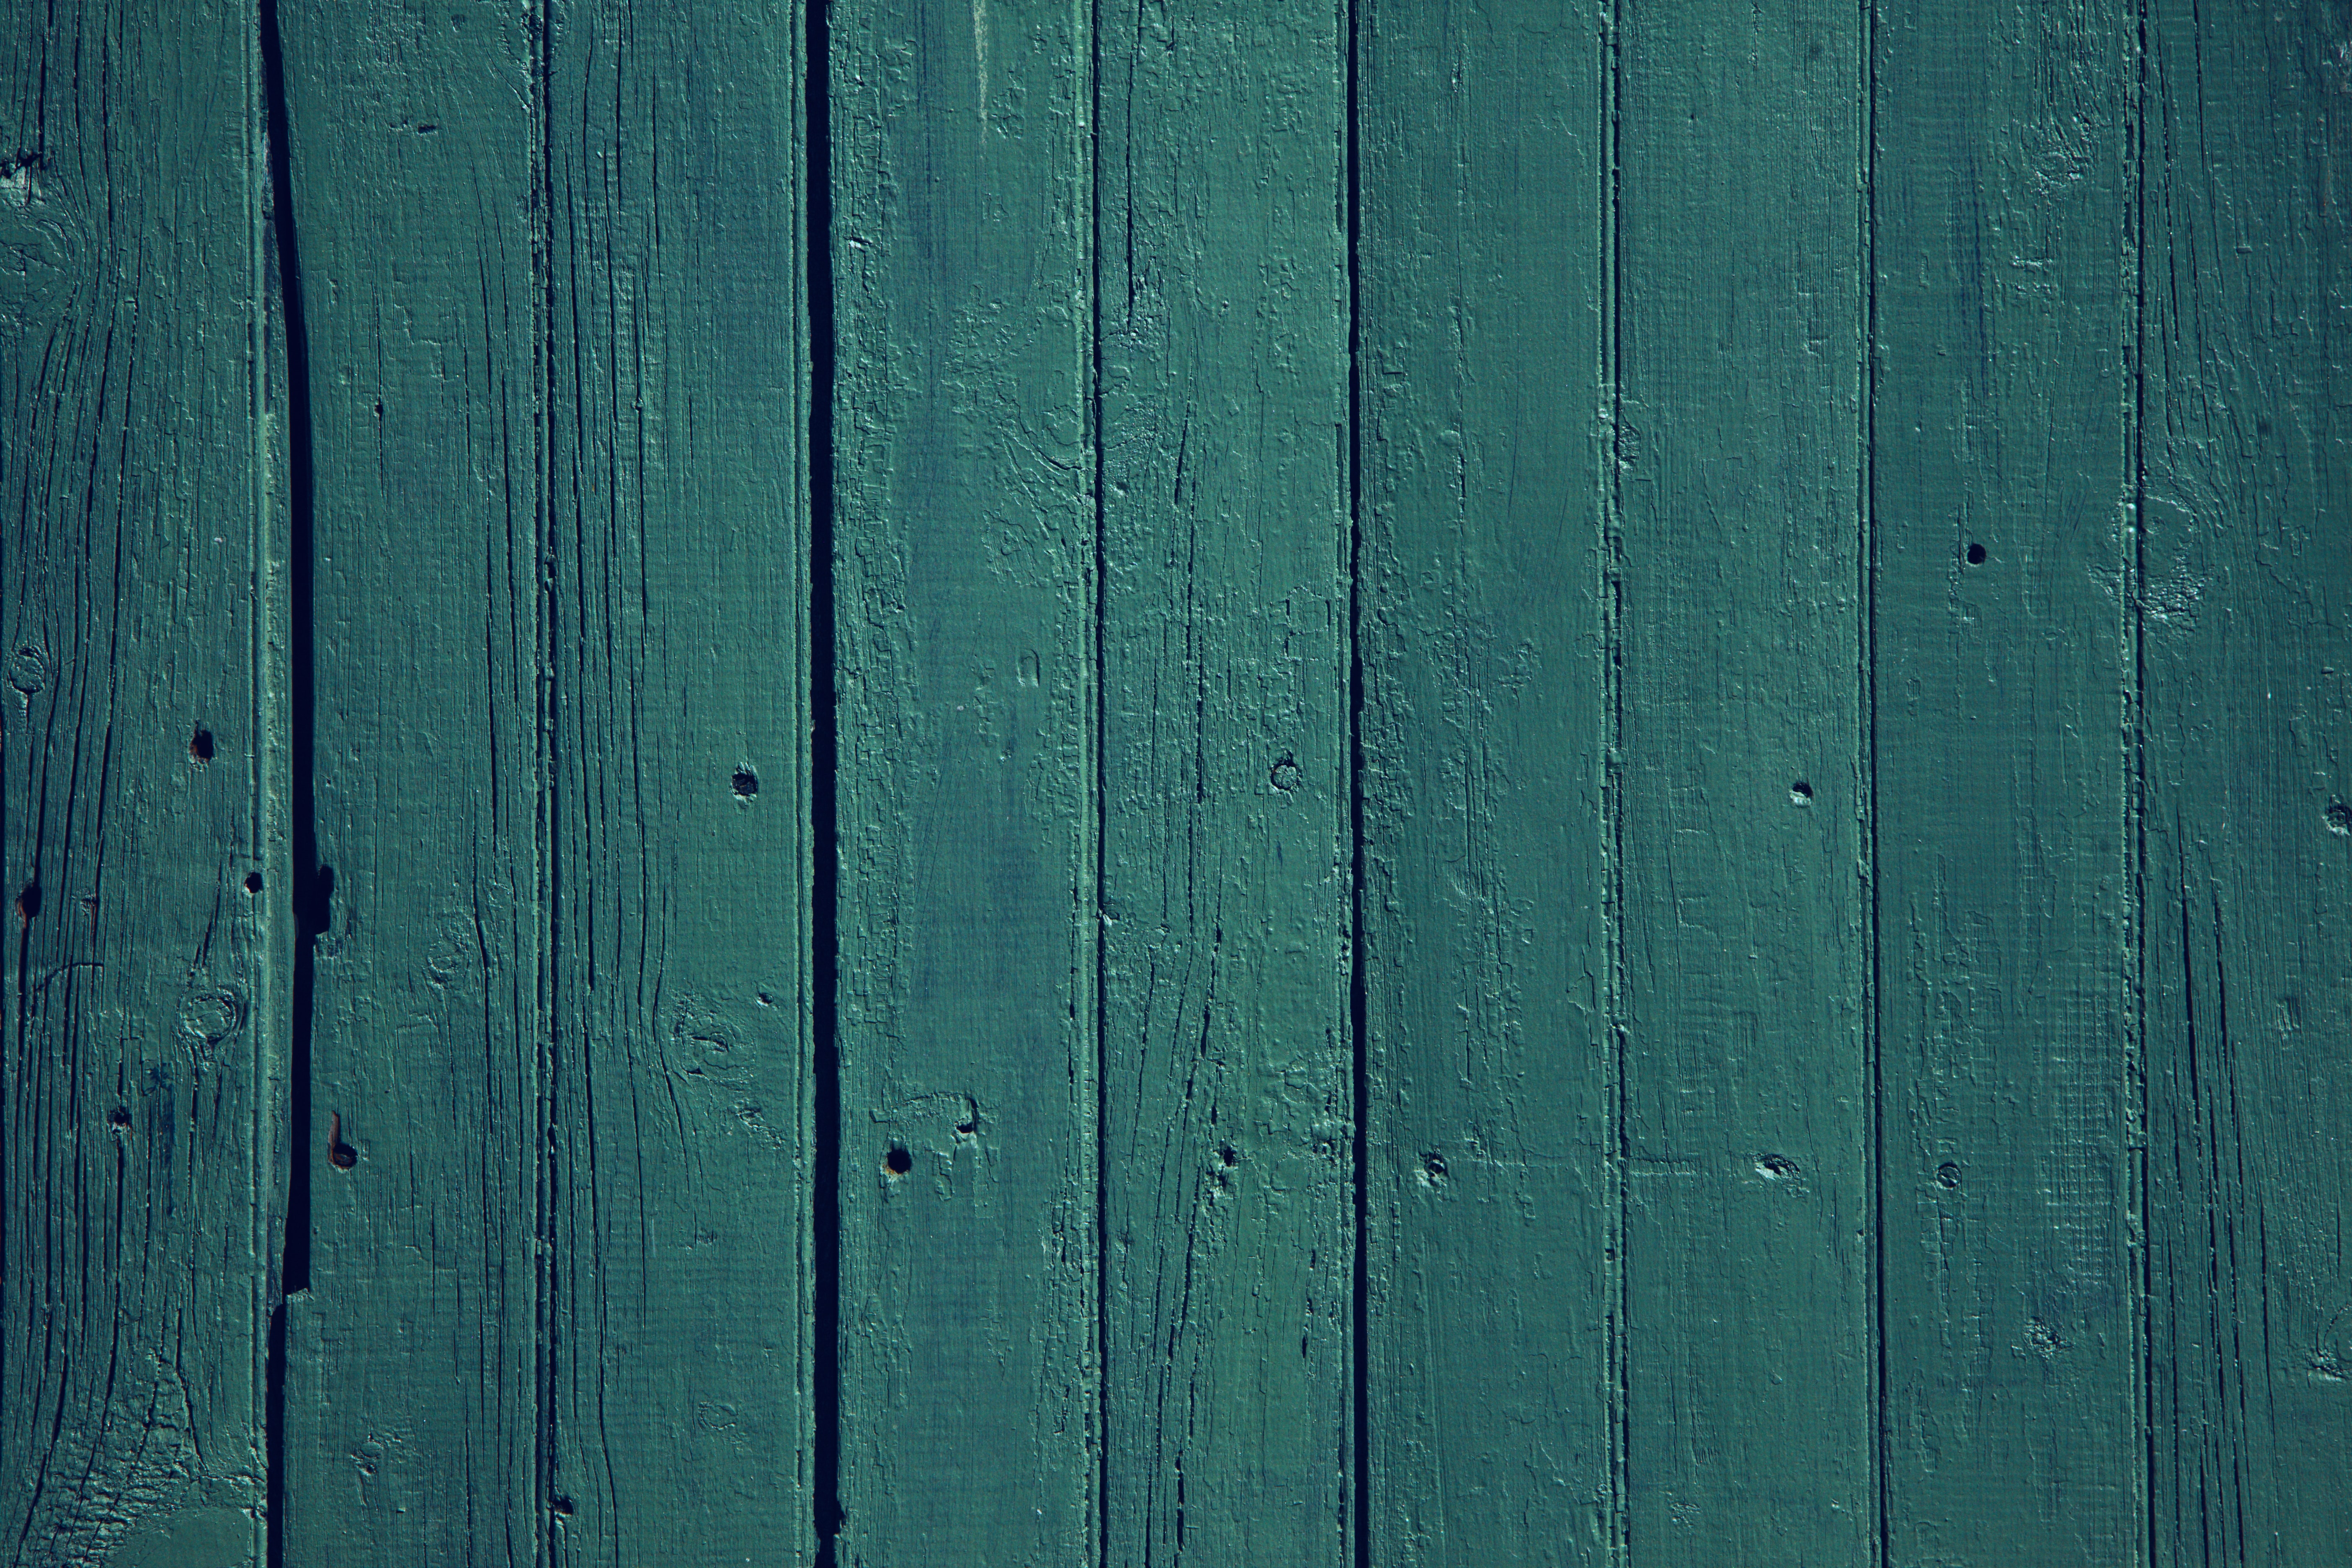 textures, green, wood, wooden, texture, paint, planks, board